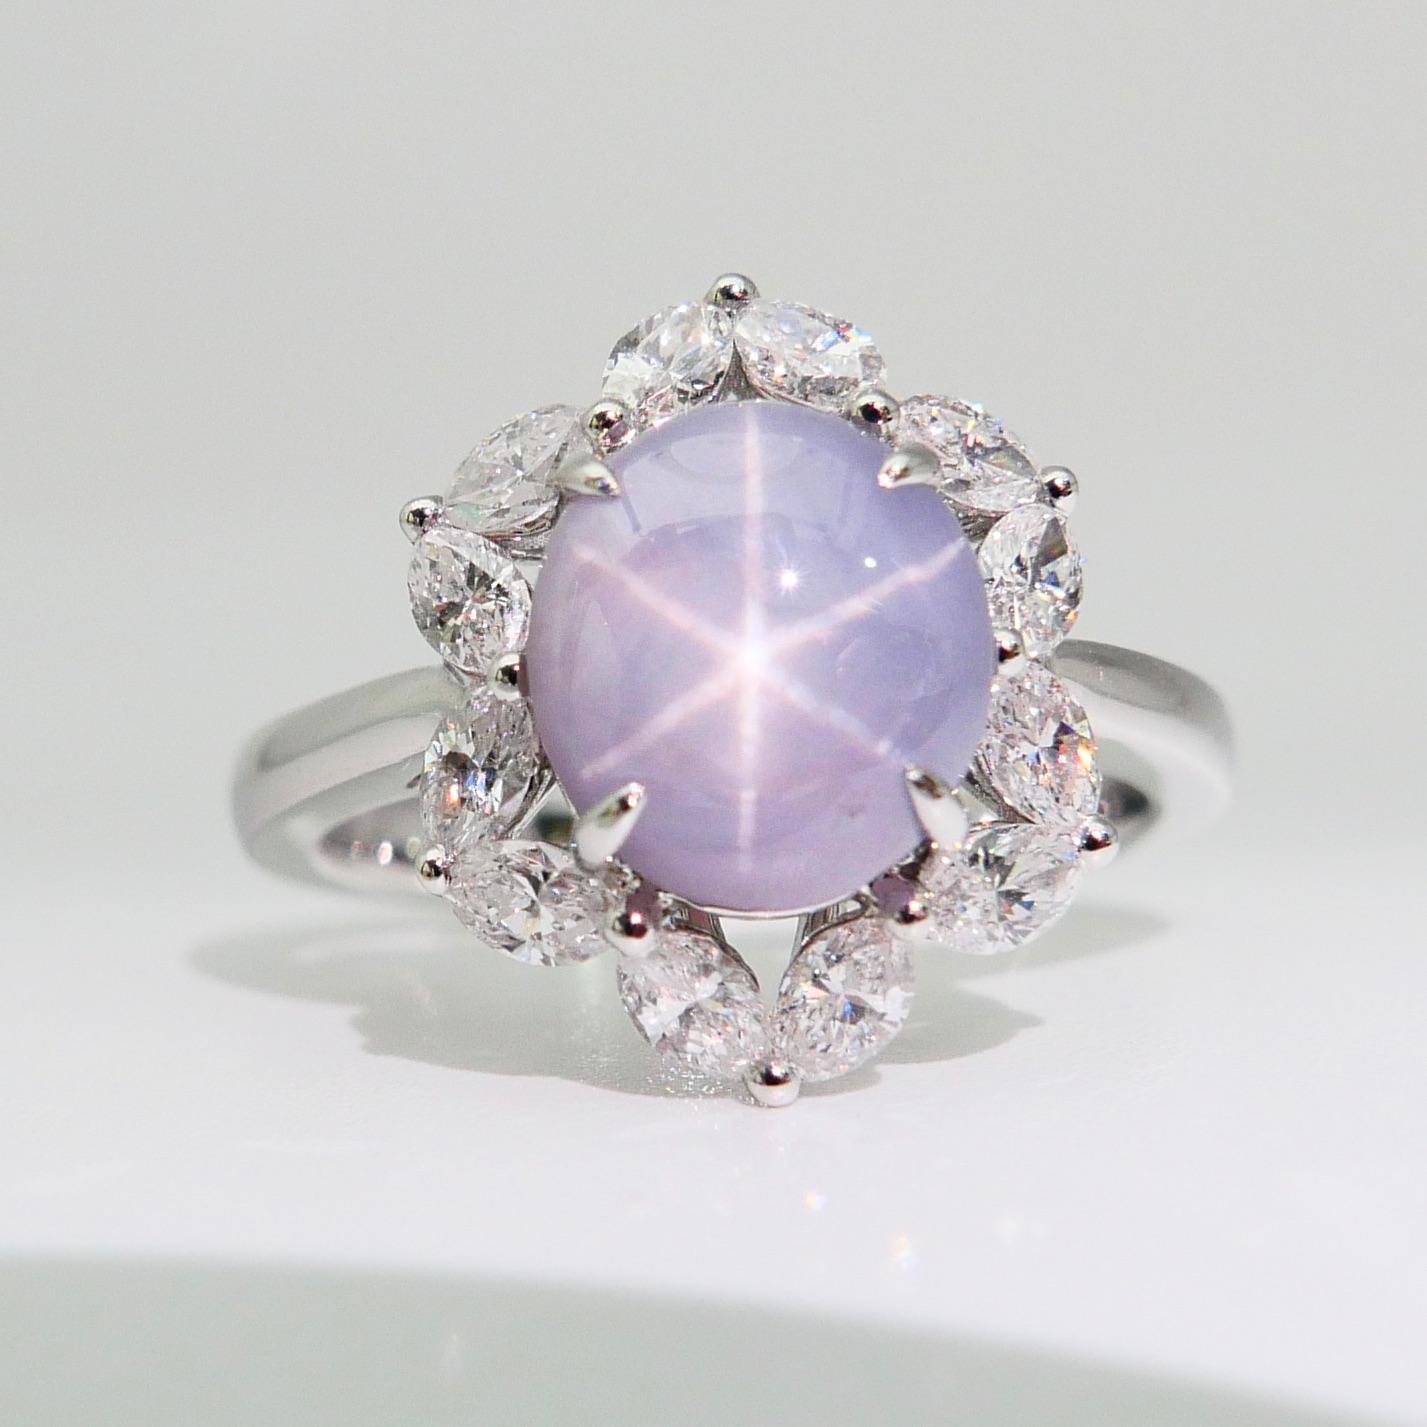 Cabochon GIA Certified 3.48 Cts Natural No Heat Star Sapphire & Diamond Cocktail Ring. For Sale